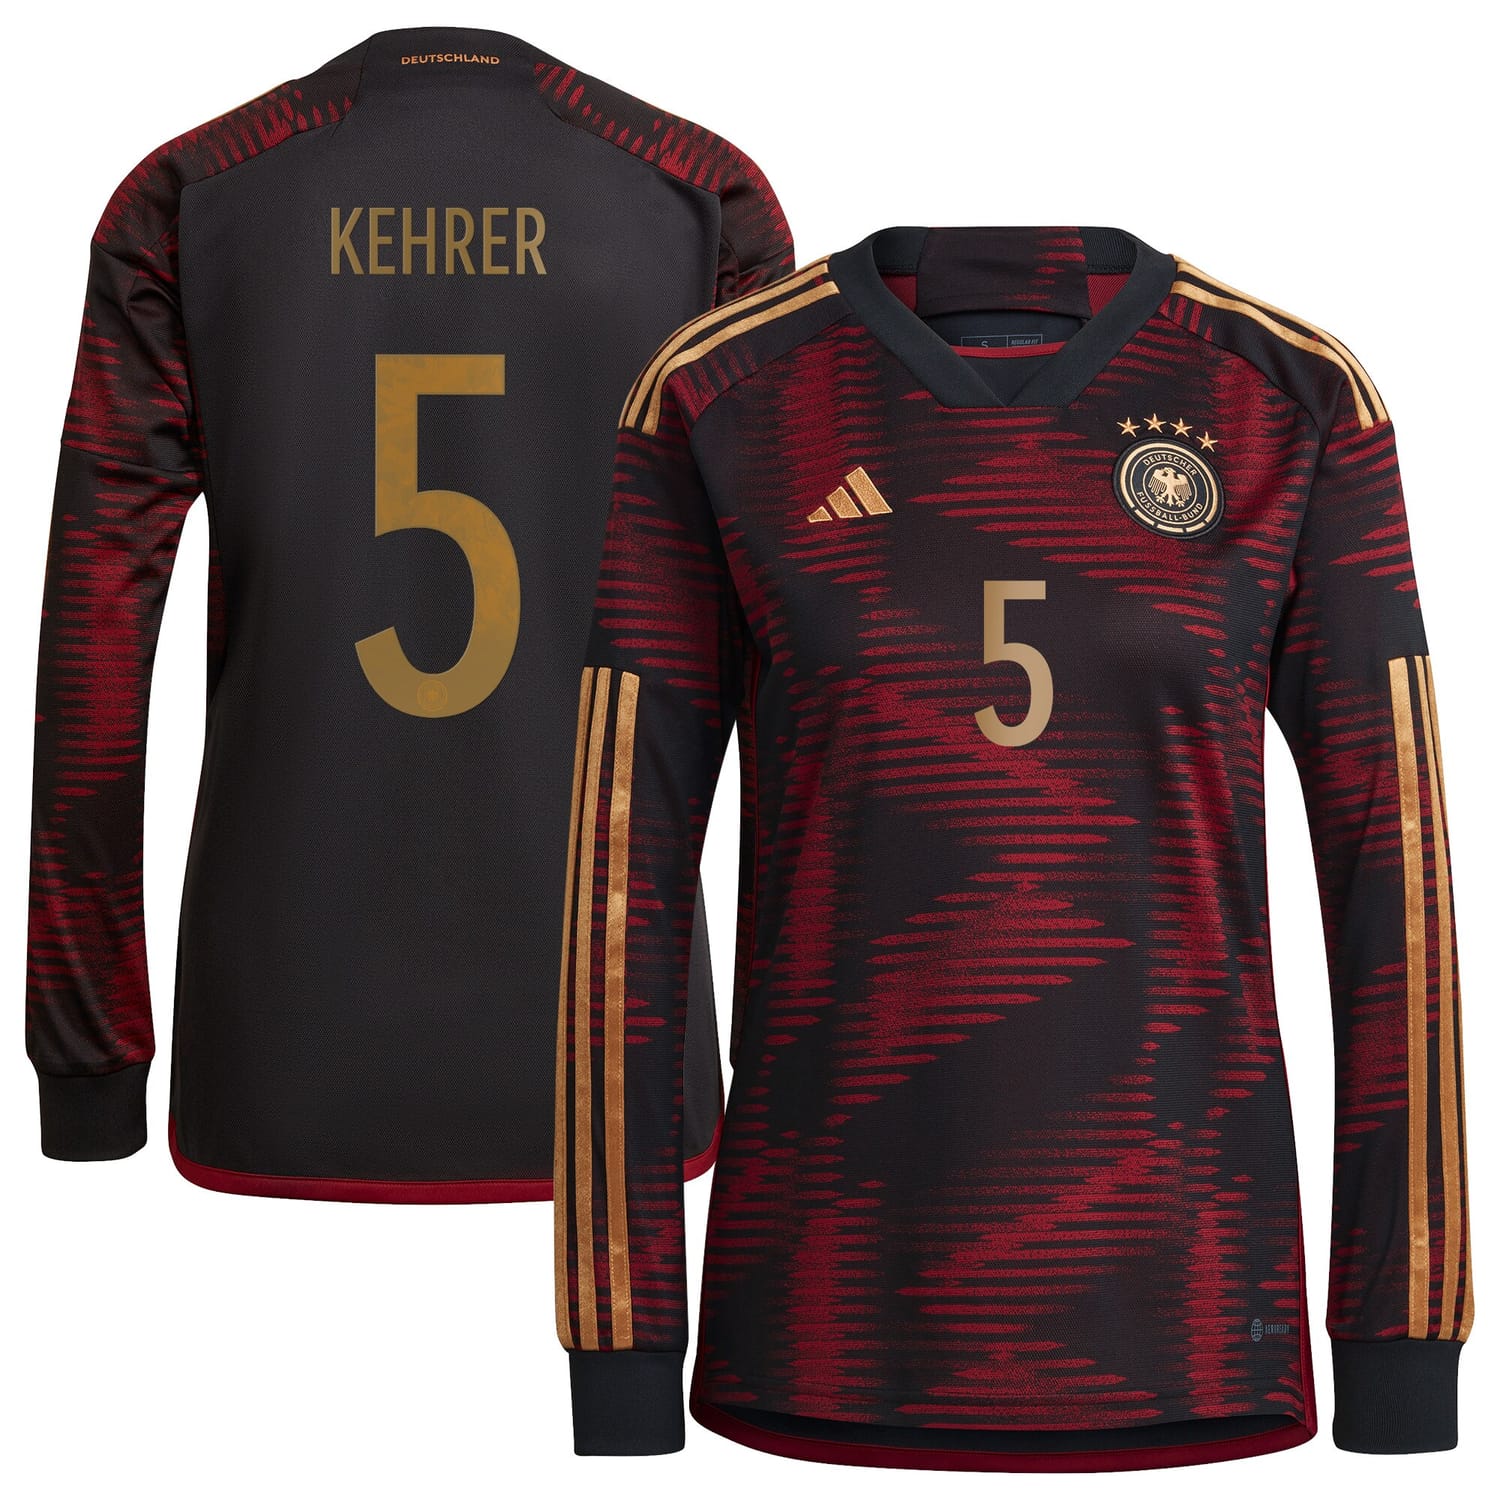 Germany National Team Away Jersey Shirt Long Sleeve player Kehrer 5 printing for Women